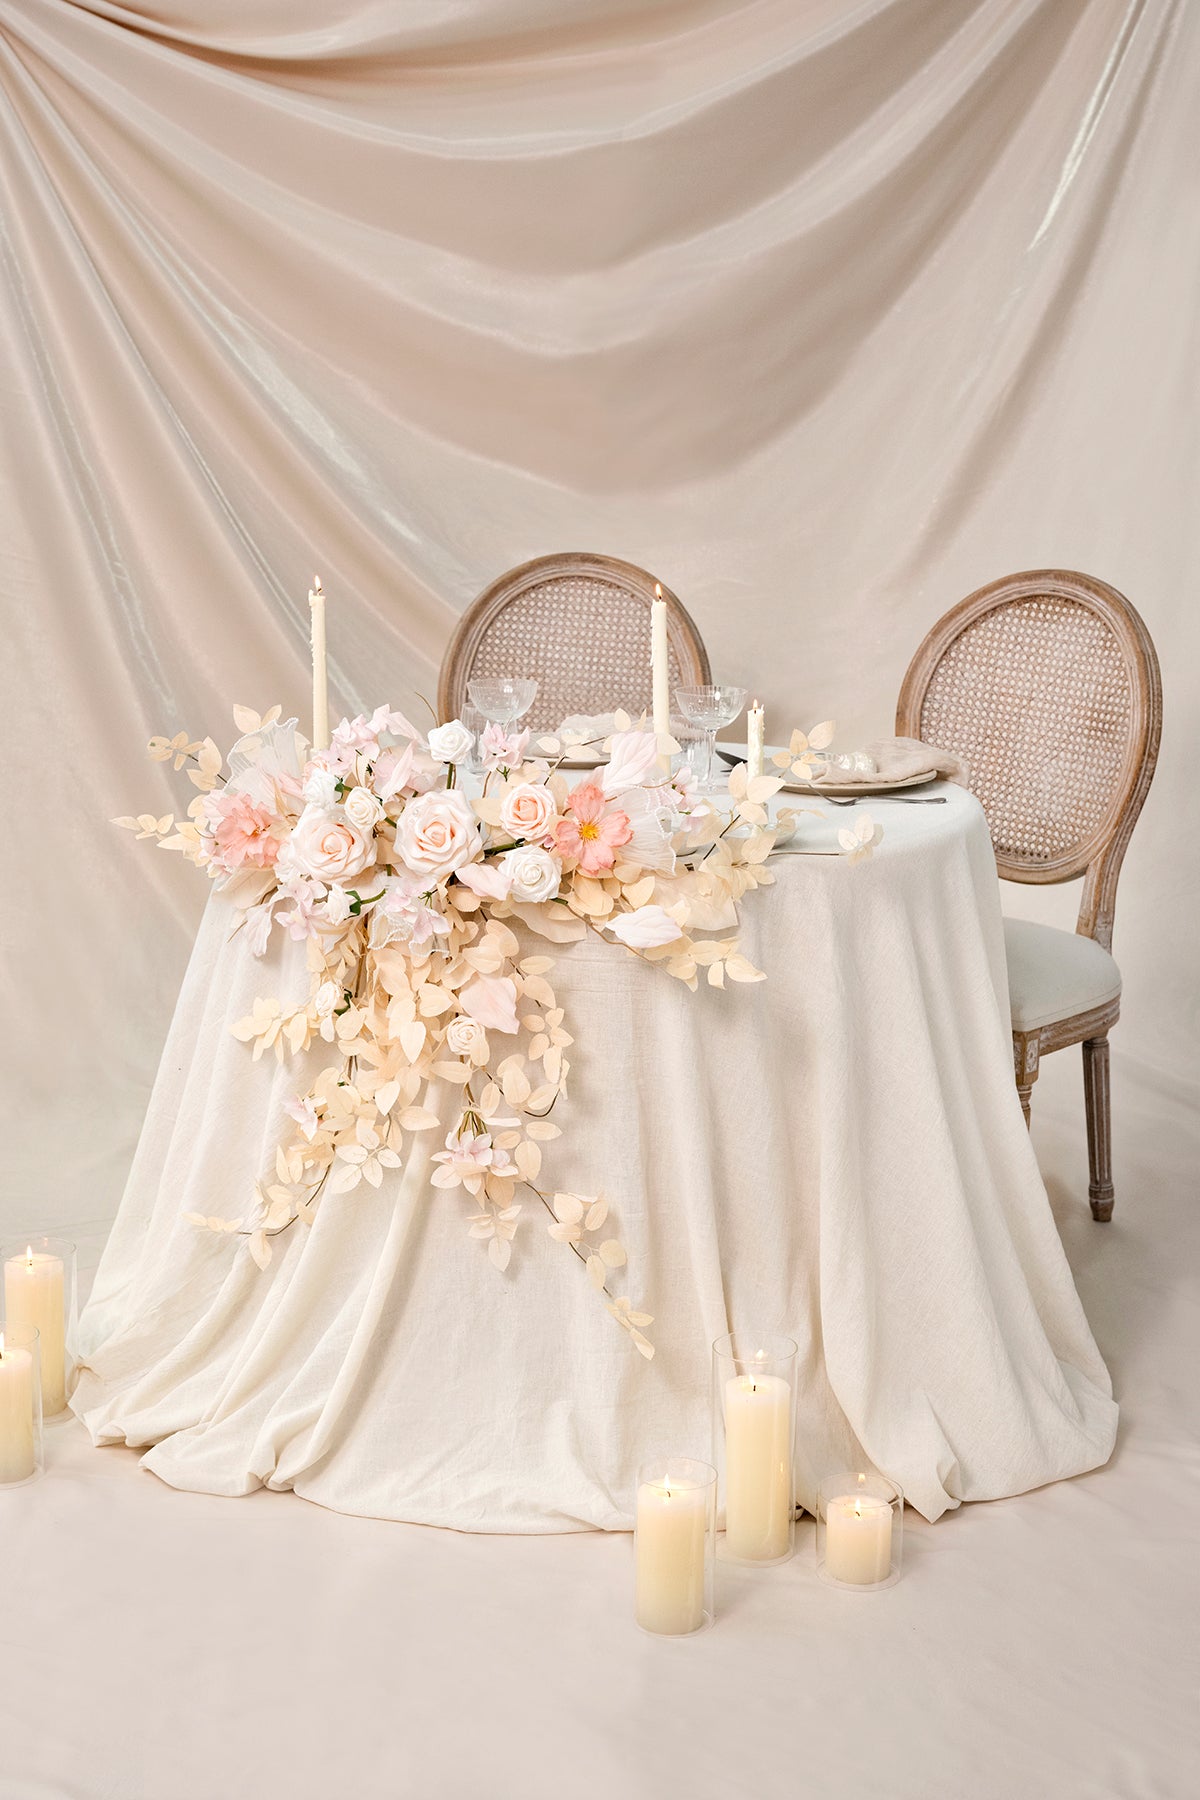 Sweetheart Table Floral Swags in Glowing Blush & Pearl | Clearance